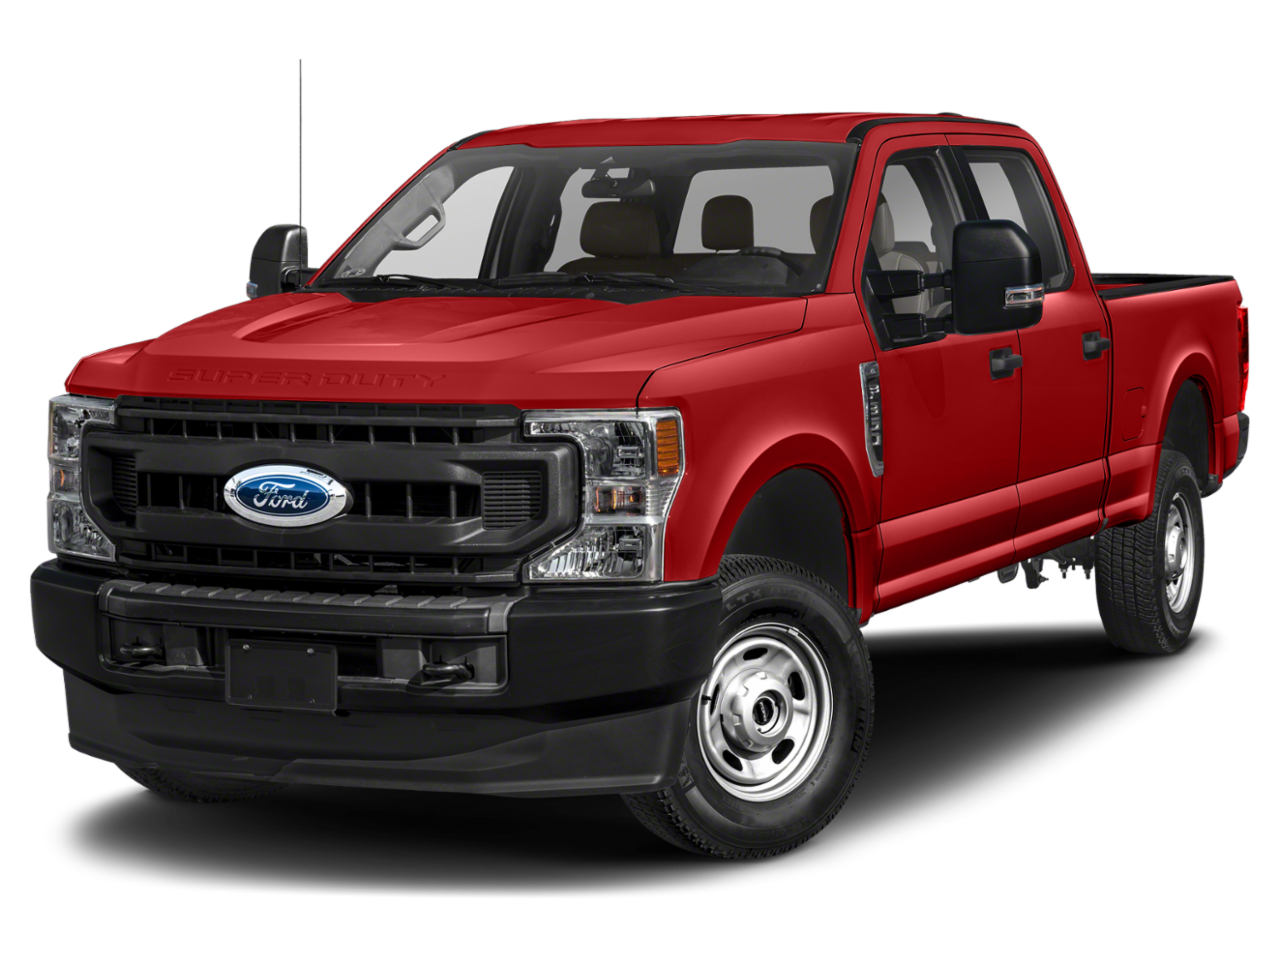 New Ford superdutyf350drw from your St Peters, MO dealership, Johnny